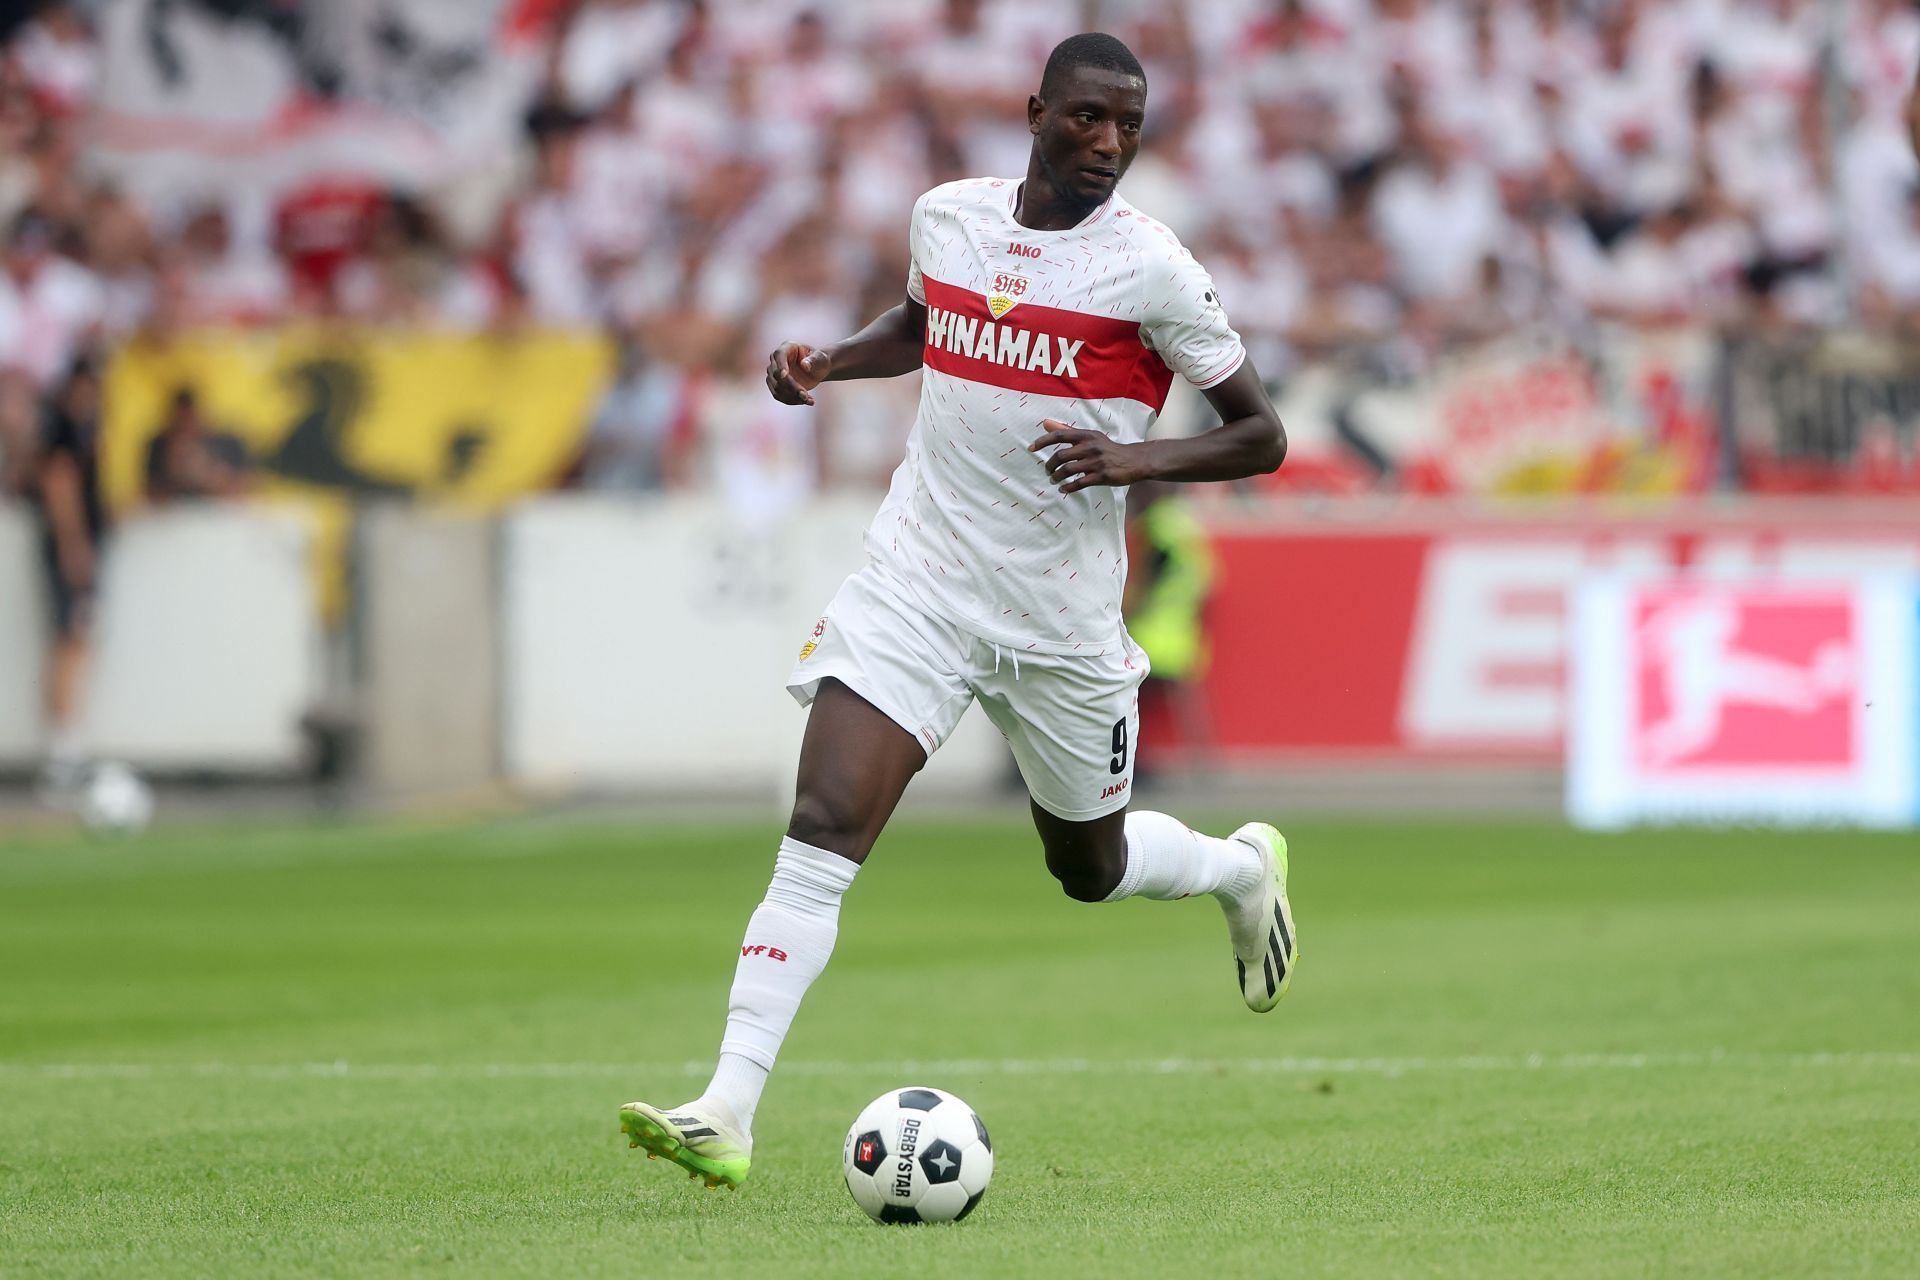 Serhou Guirassy is the most prolific striker in the Bundesliga currently